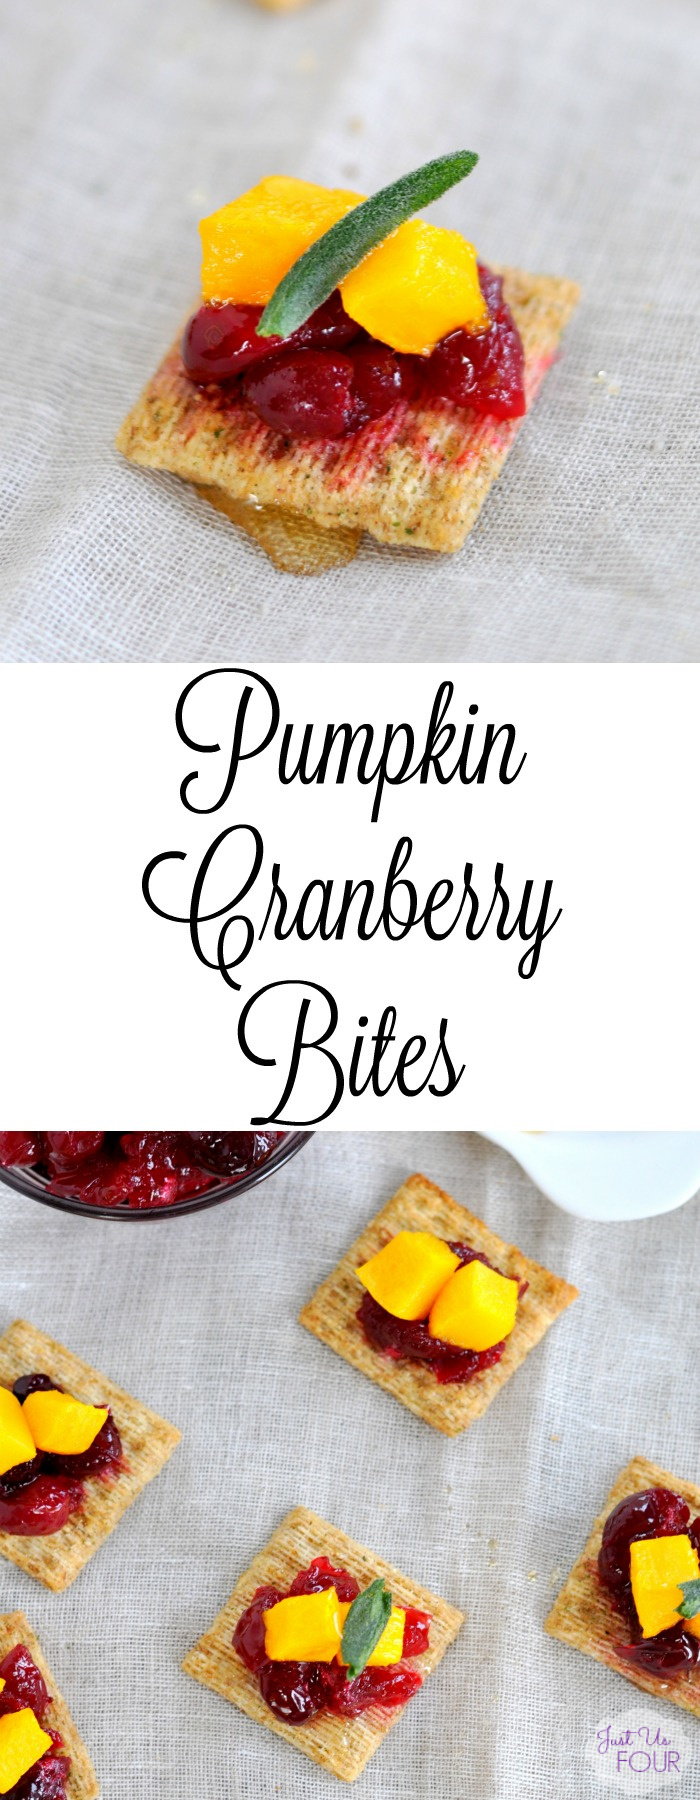 Cranberry Pumpkin Bites are the perfect quick and easy party appetizer that tastes amazing too.